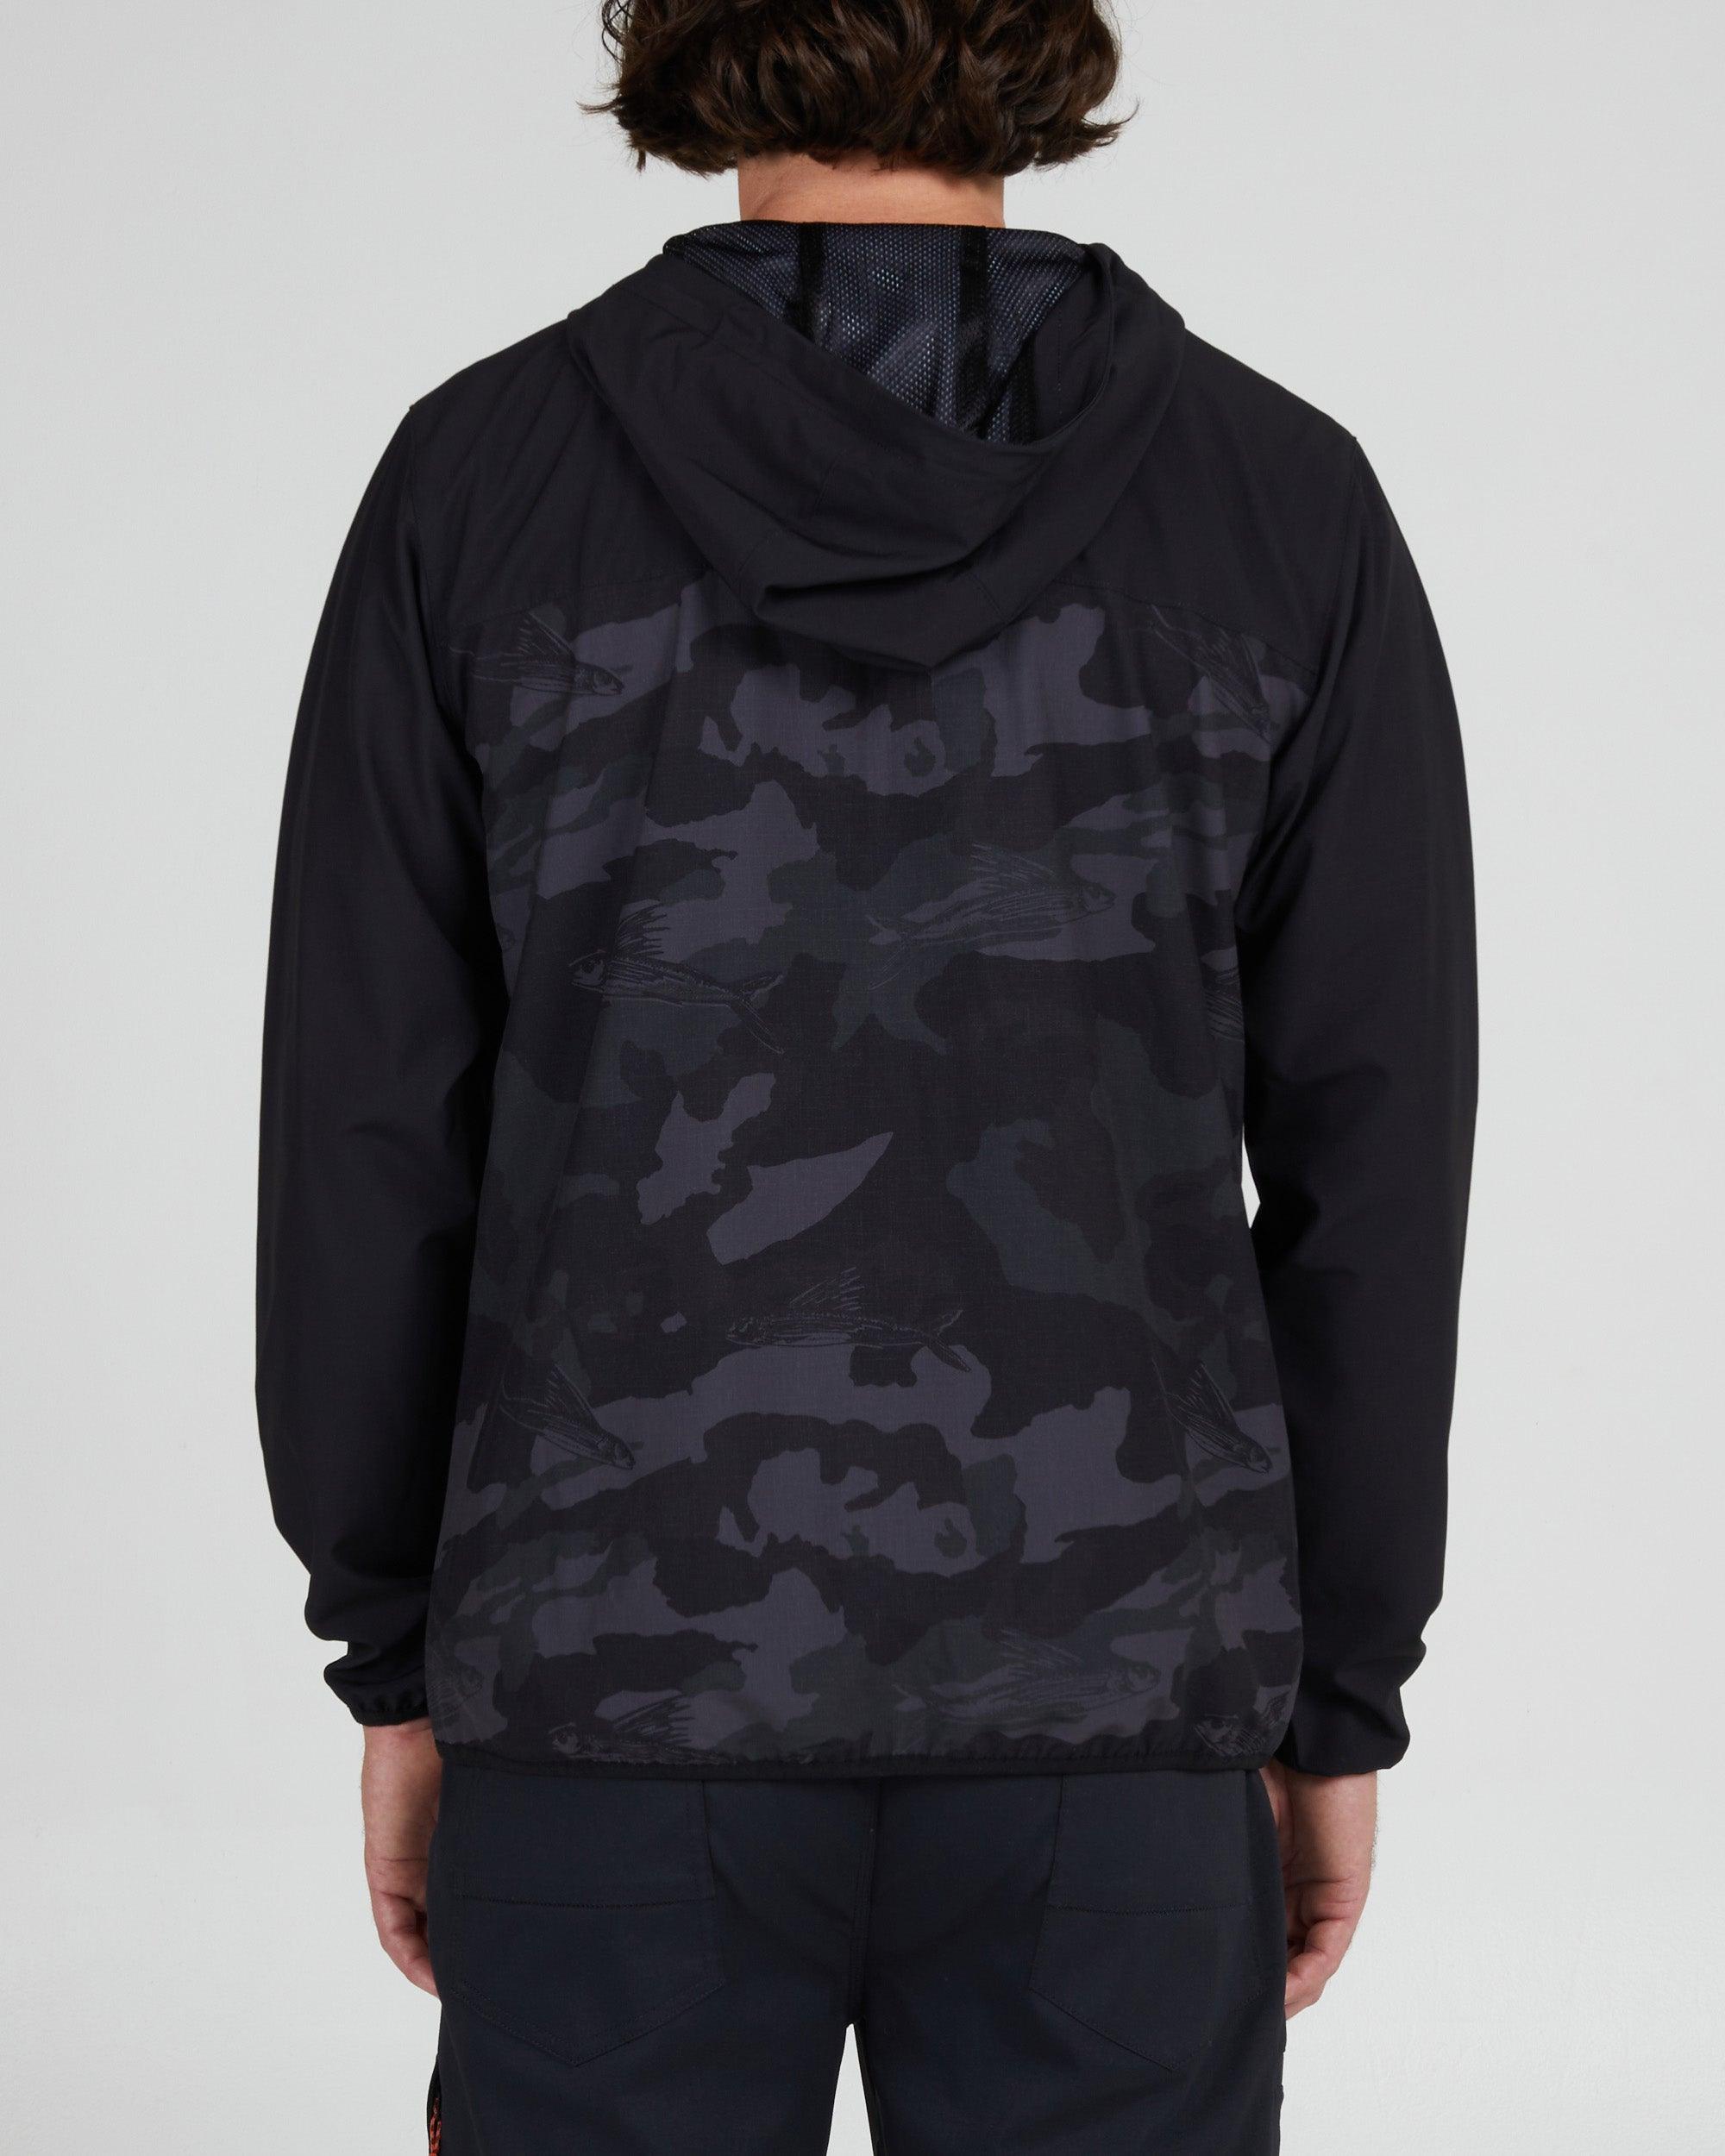 Stowaway Jacket - Black Camo - Purpose-Built / Home of the Trades